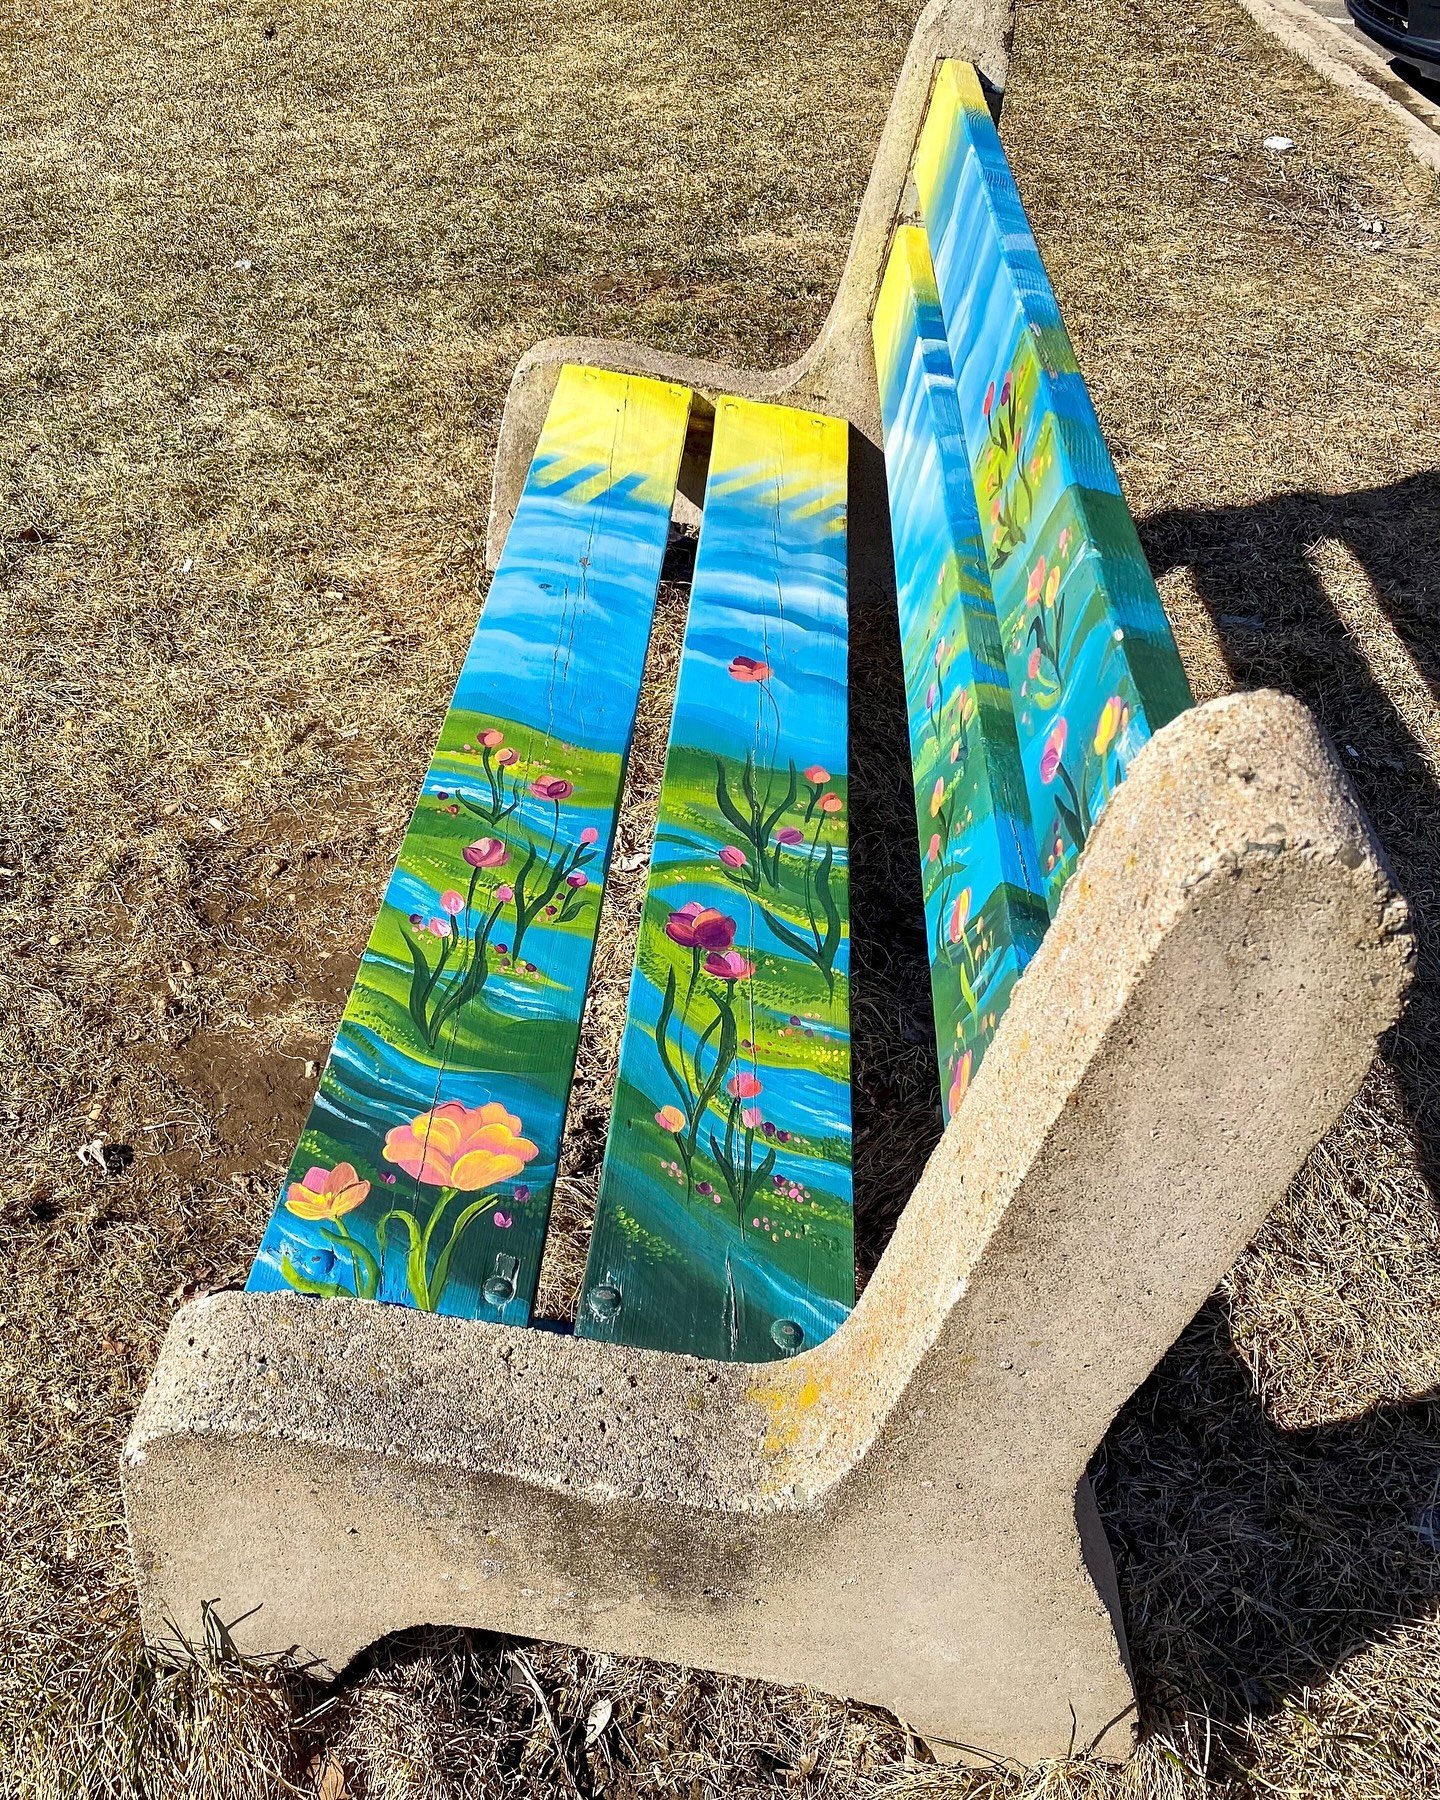 Love these Art in the Park Public Benches seen throughout Fredericton! These Nature from Diverse Cultures themed benches were created by newcomer artists from the Multicultural Association of Fredericton with support from the City. I discovered this 